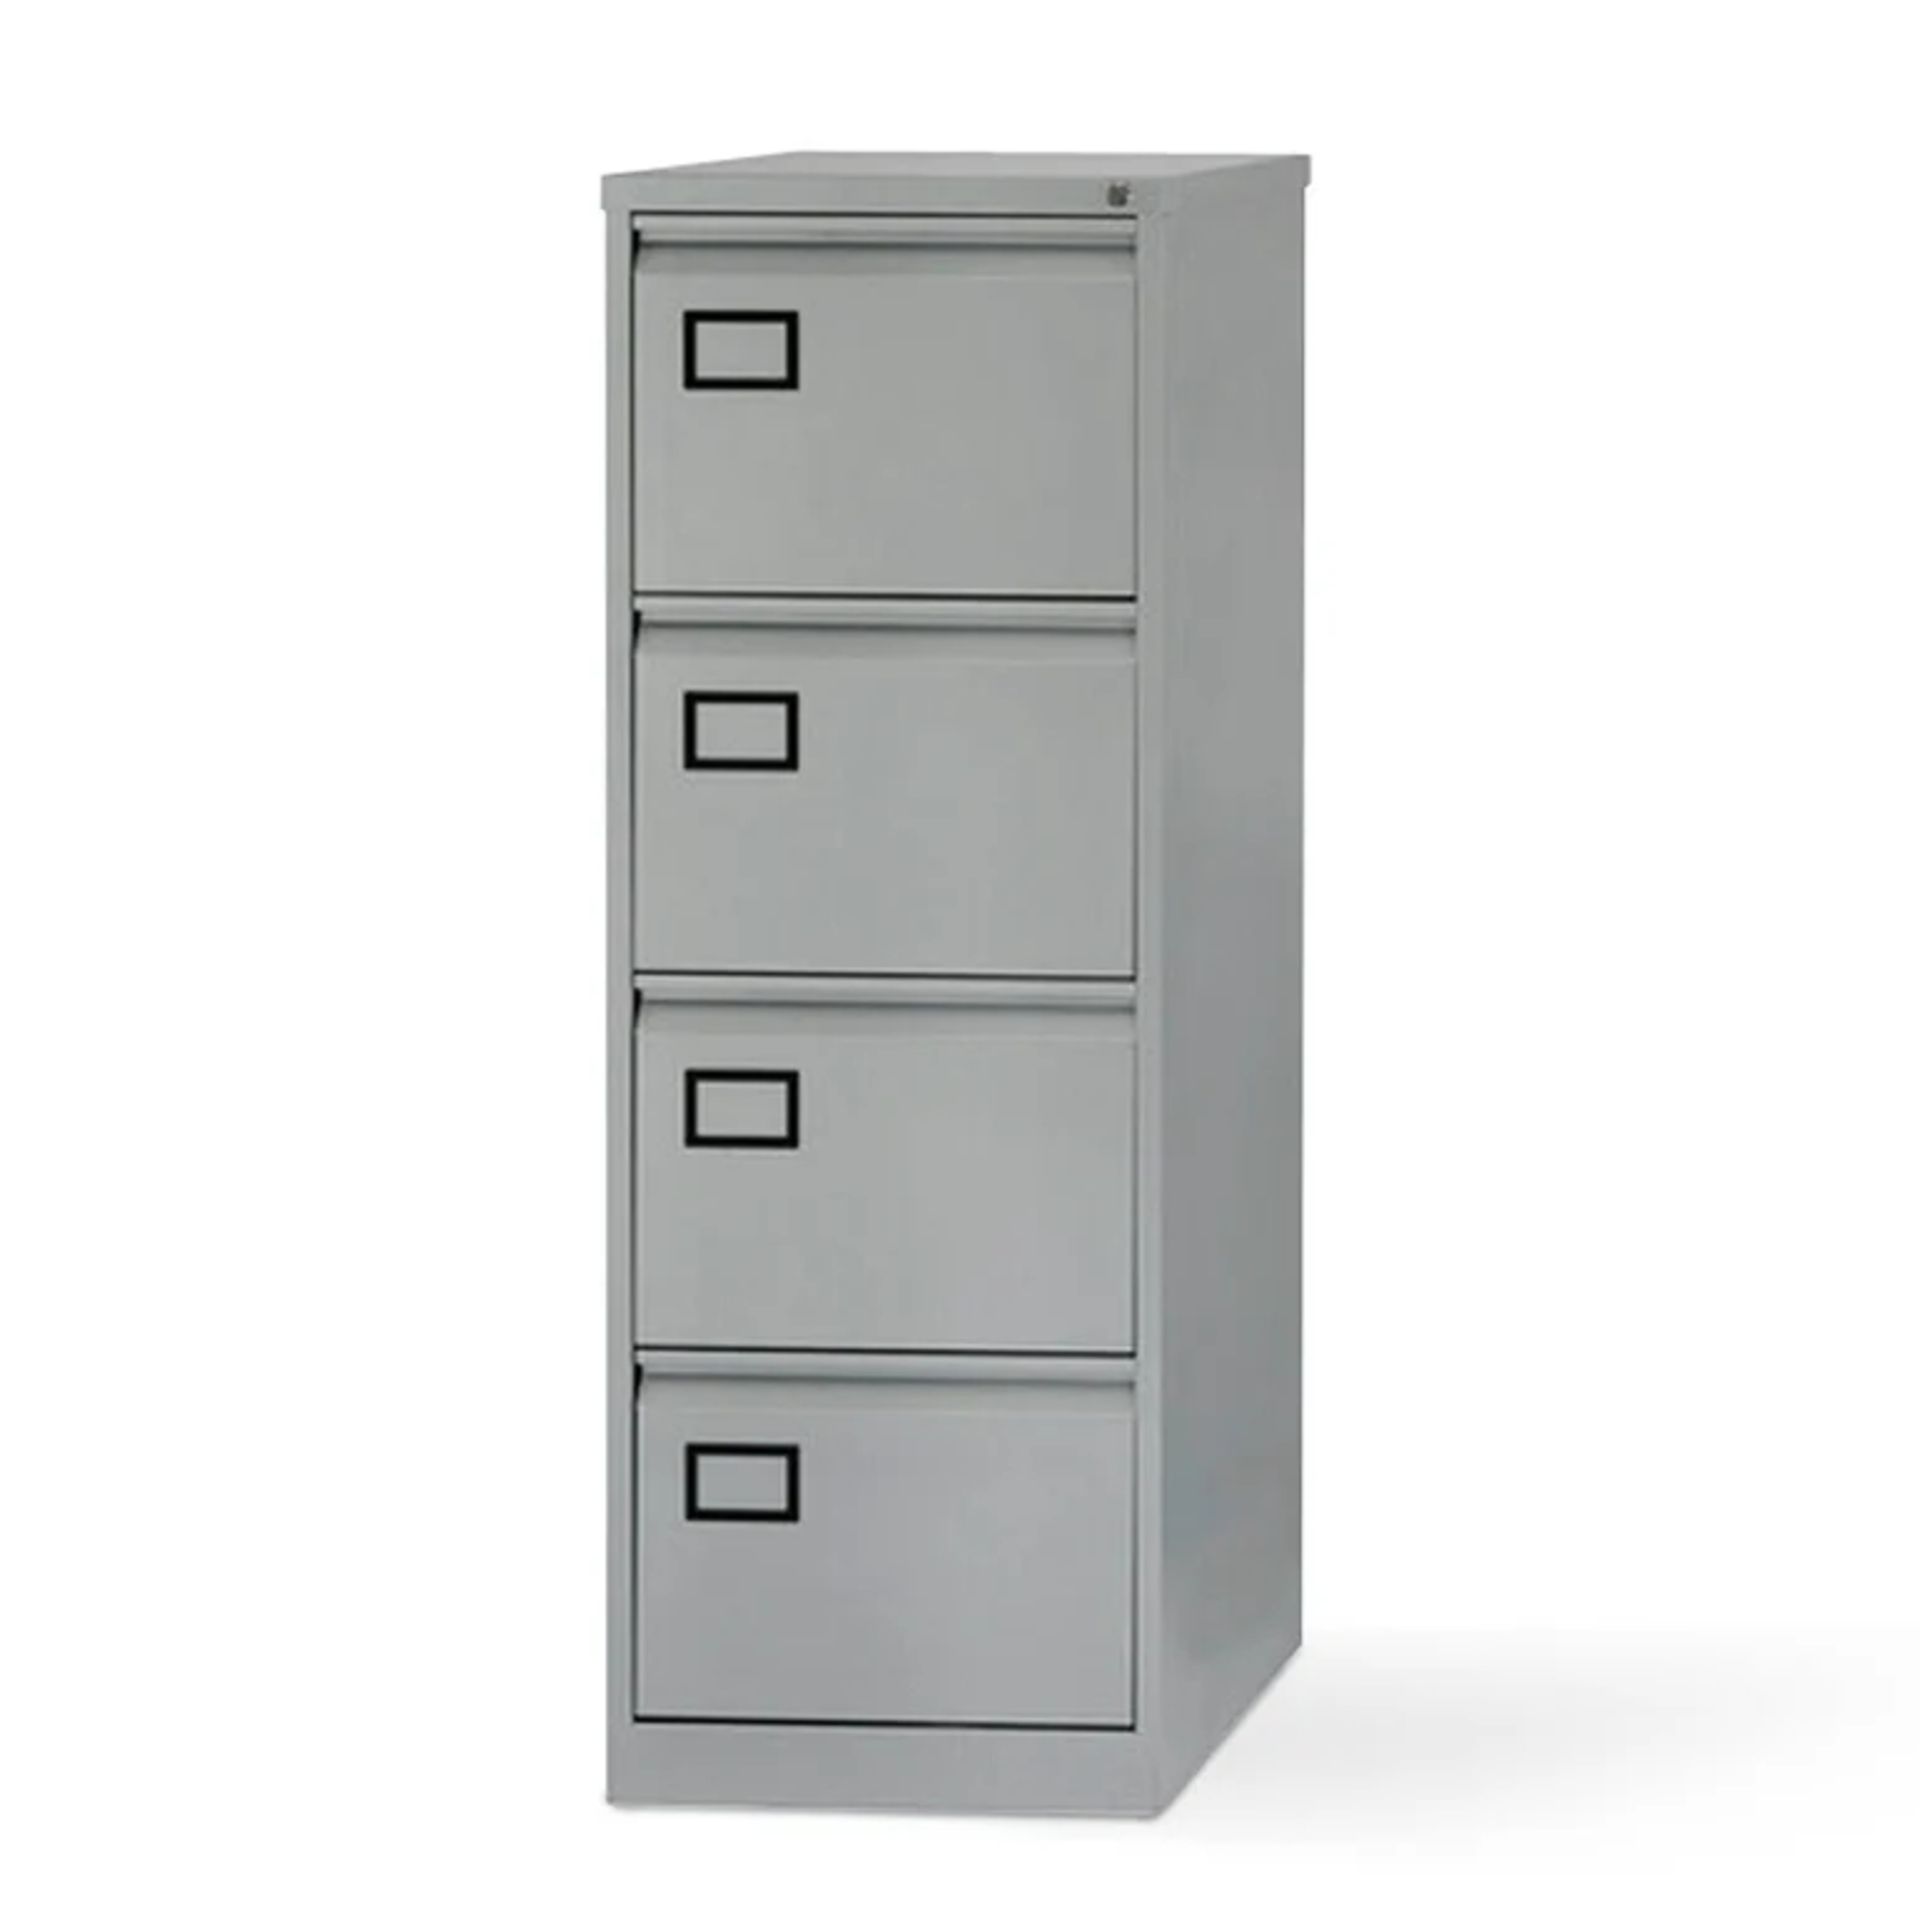 Bisley Steel Filing Cabinet with 4 Lockable Drawers 470 x 622 x 1,312 mm Grey RRP £299 R15